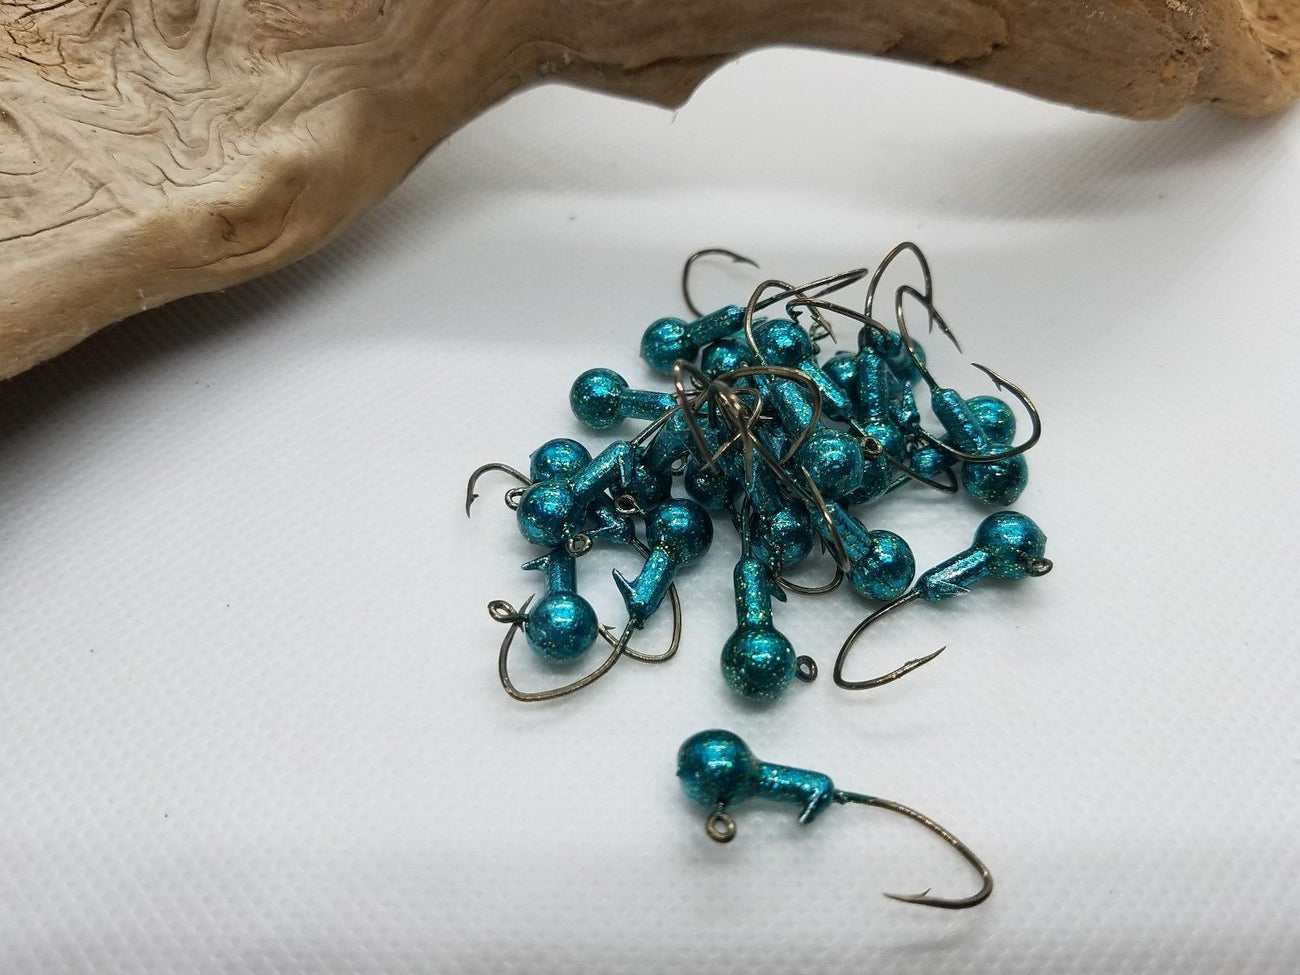 40 pk. 1/16 oz. Cam's "Blue Green Flake" Painted Jigs with Collar and #2 Bronze "NASTY BEND HOOKS"